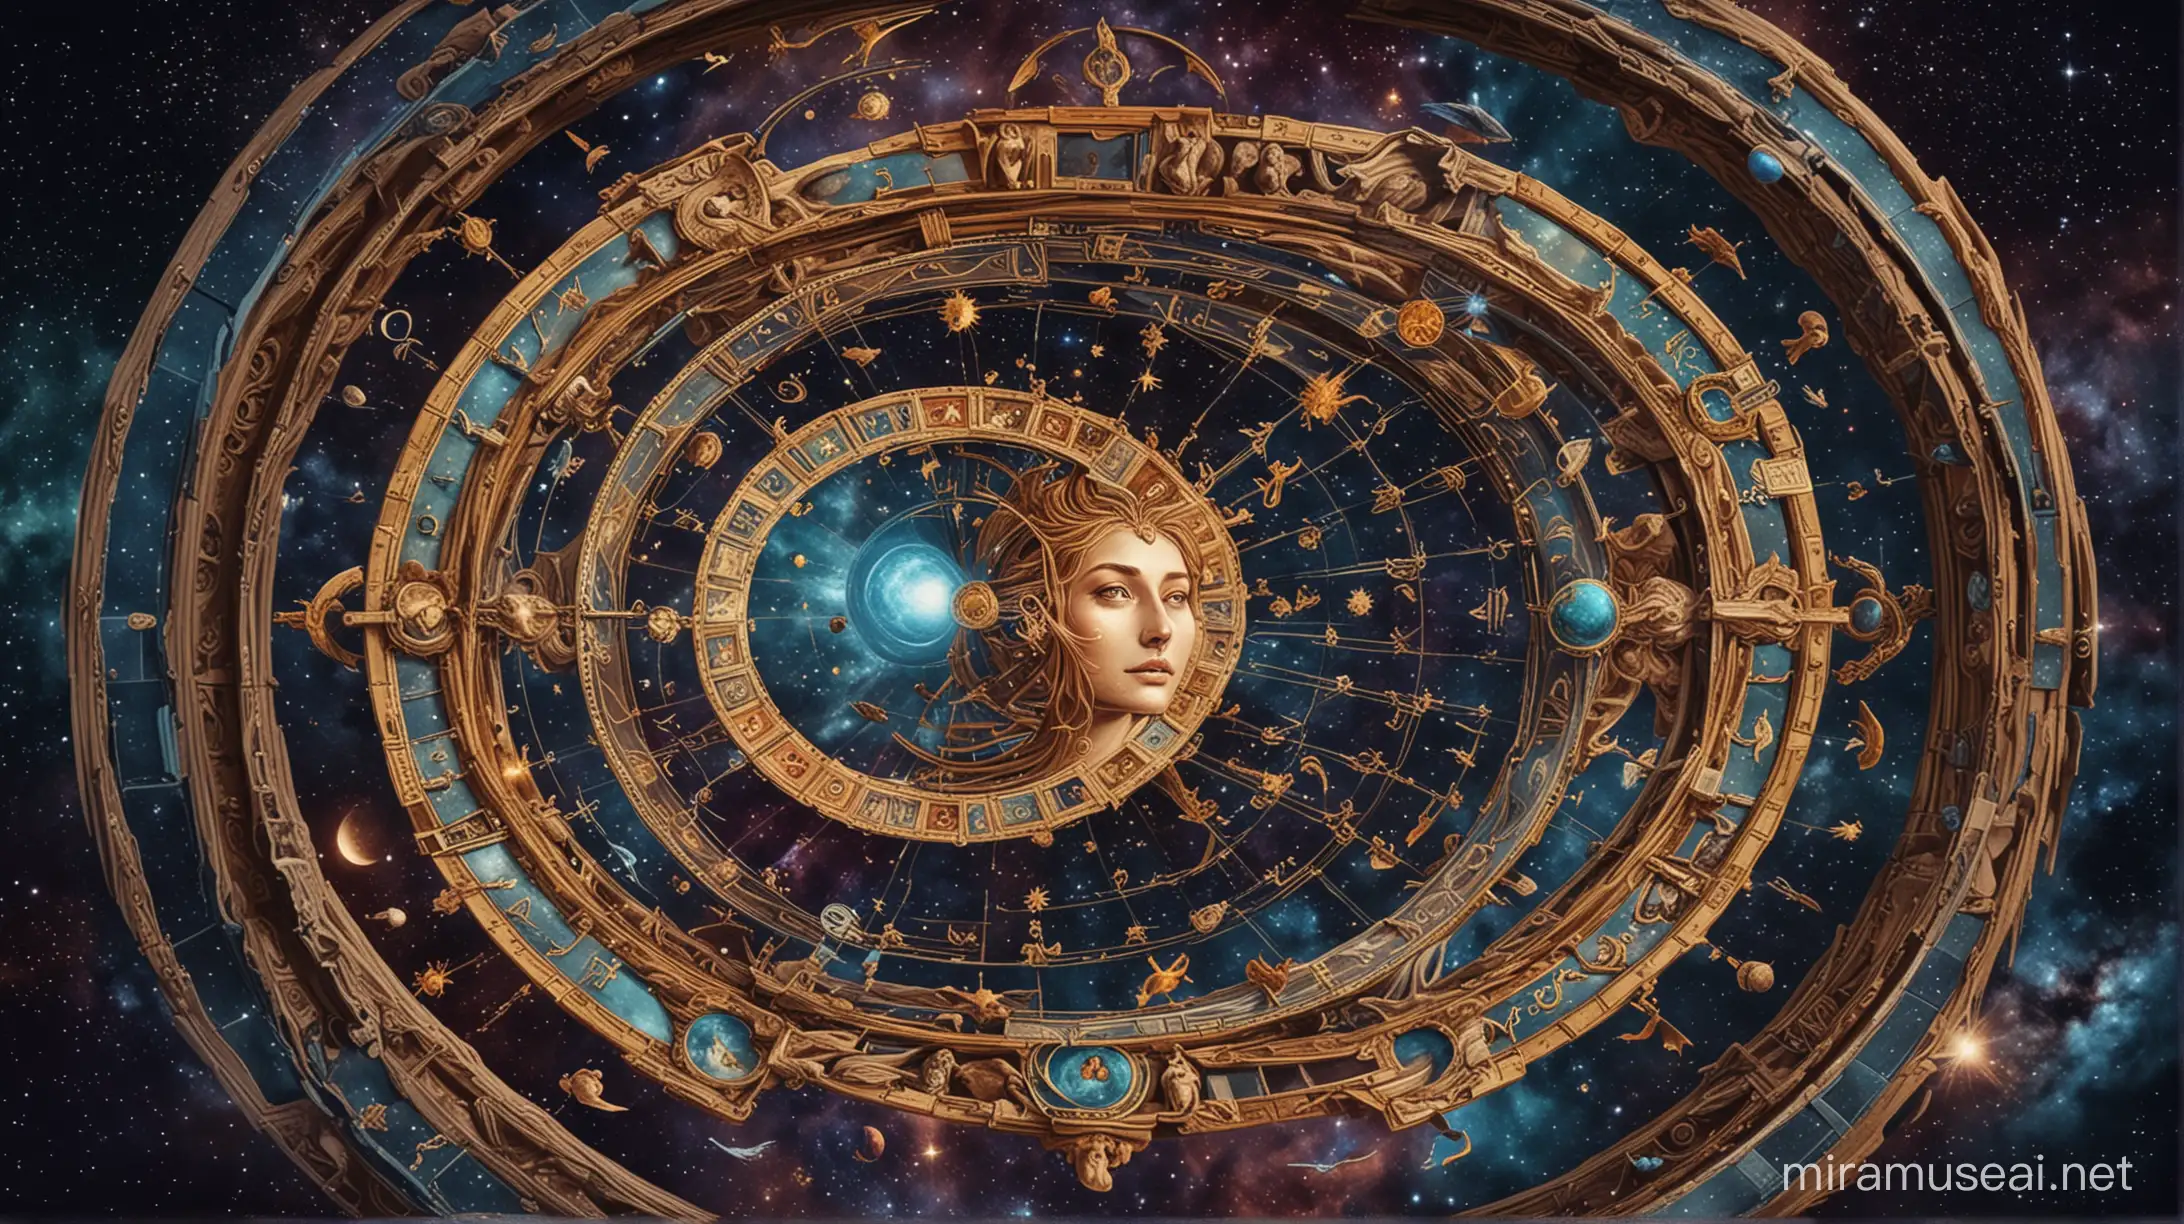 astrological wheel with human faces flying around the wheel in the universe in a fantasy style